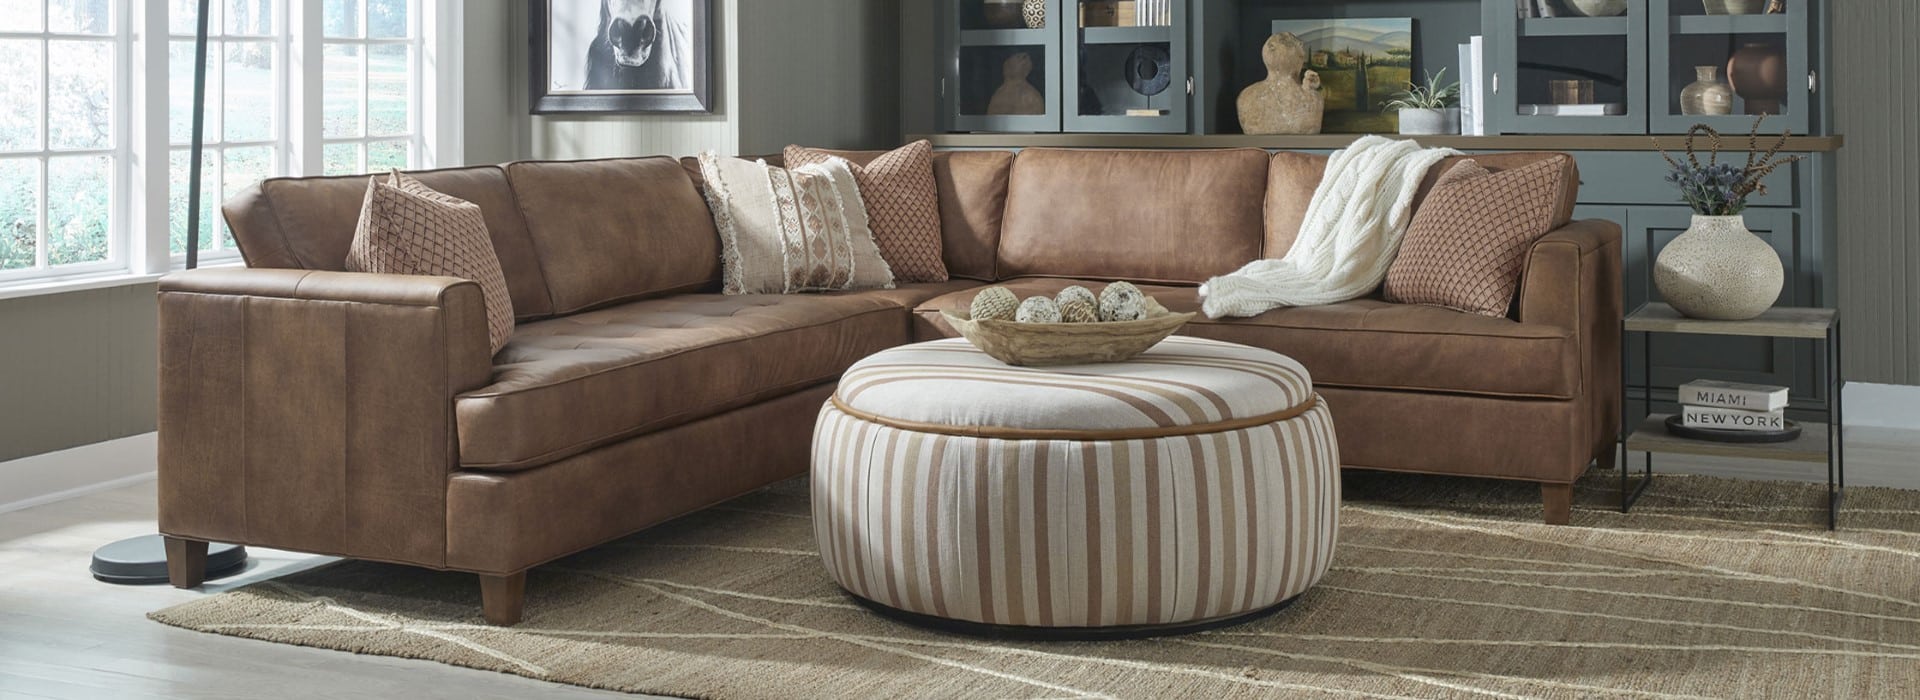 Colton Section with Wilson Ottoman at By Design Furniture + Interior Design